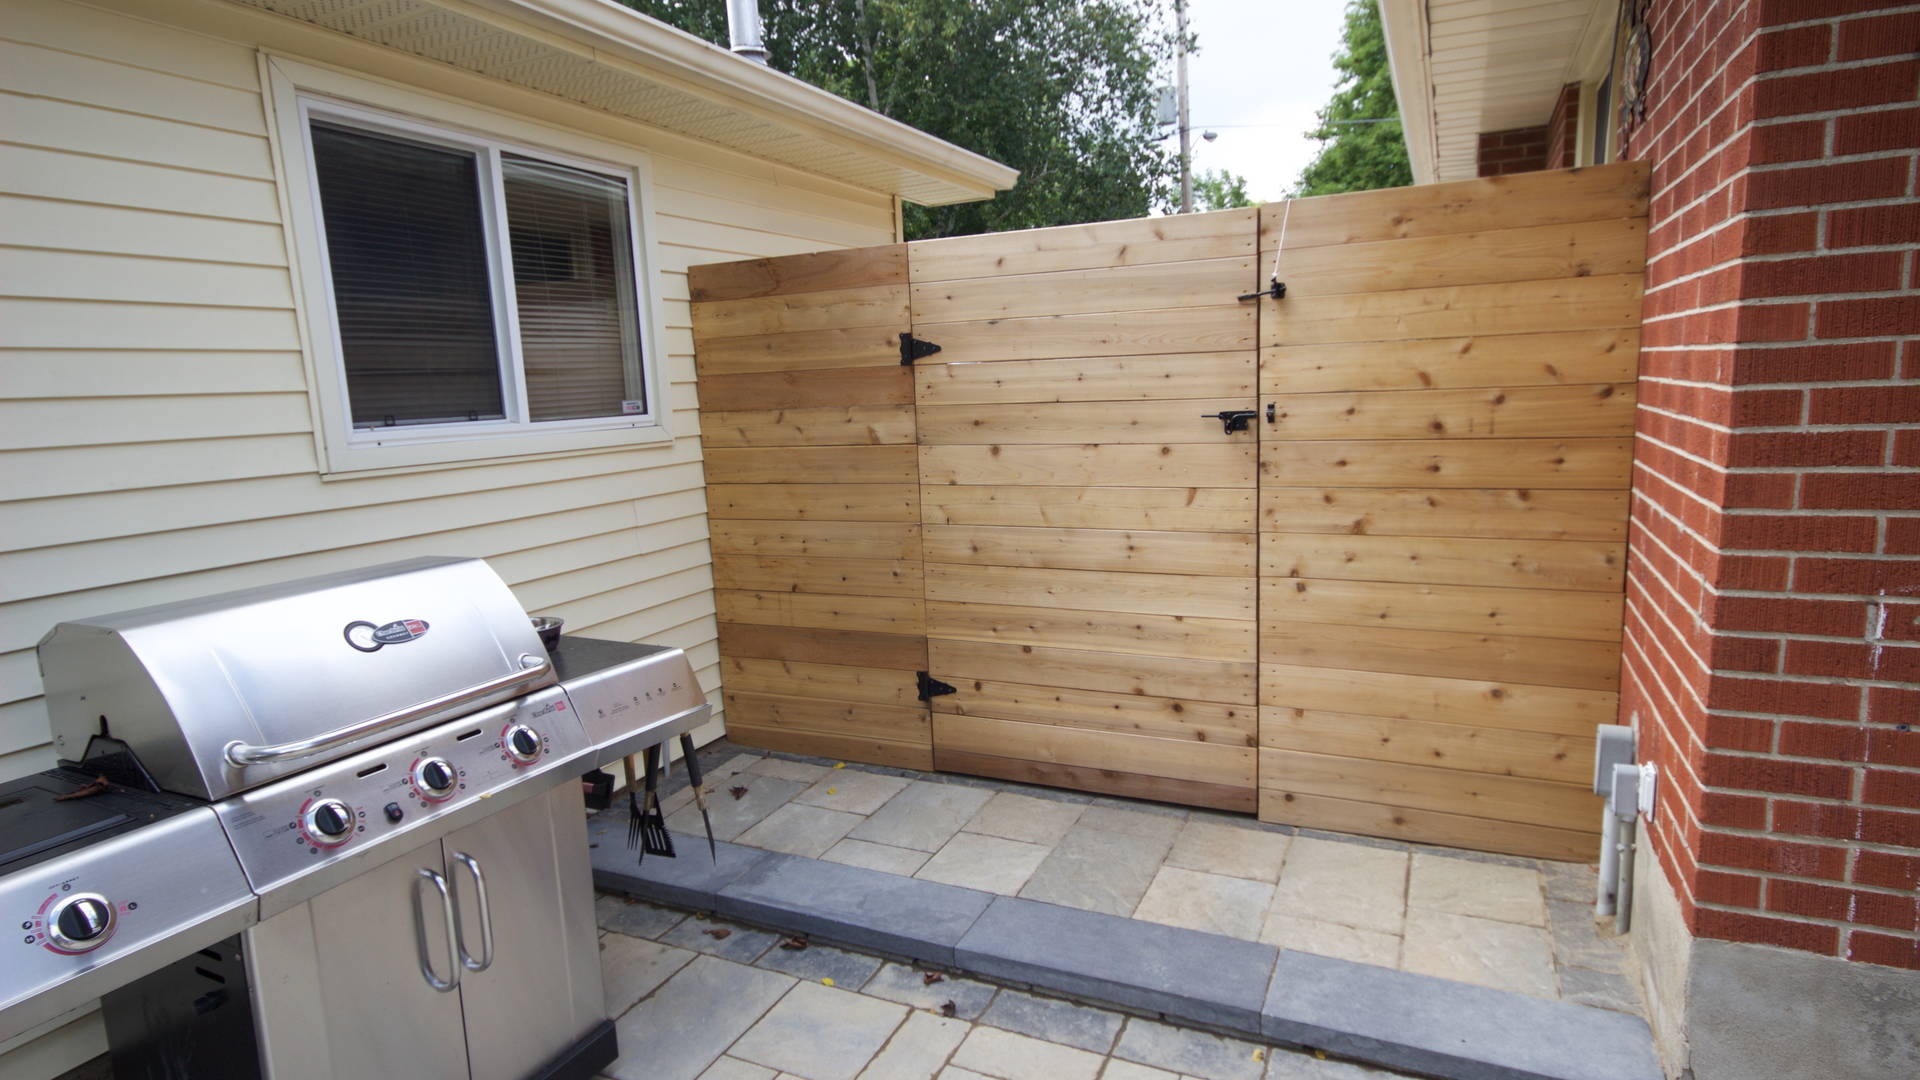 Small cooking area complete with a modern, horizontal fence and gate, and an interlock patio made up of large, pre-fabricated stones for the barbecue to rest on. Modern hardscaping and woodwork project in London Ontario.